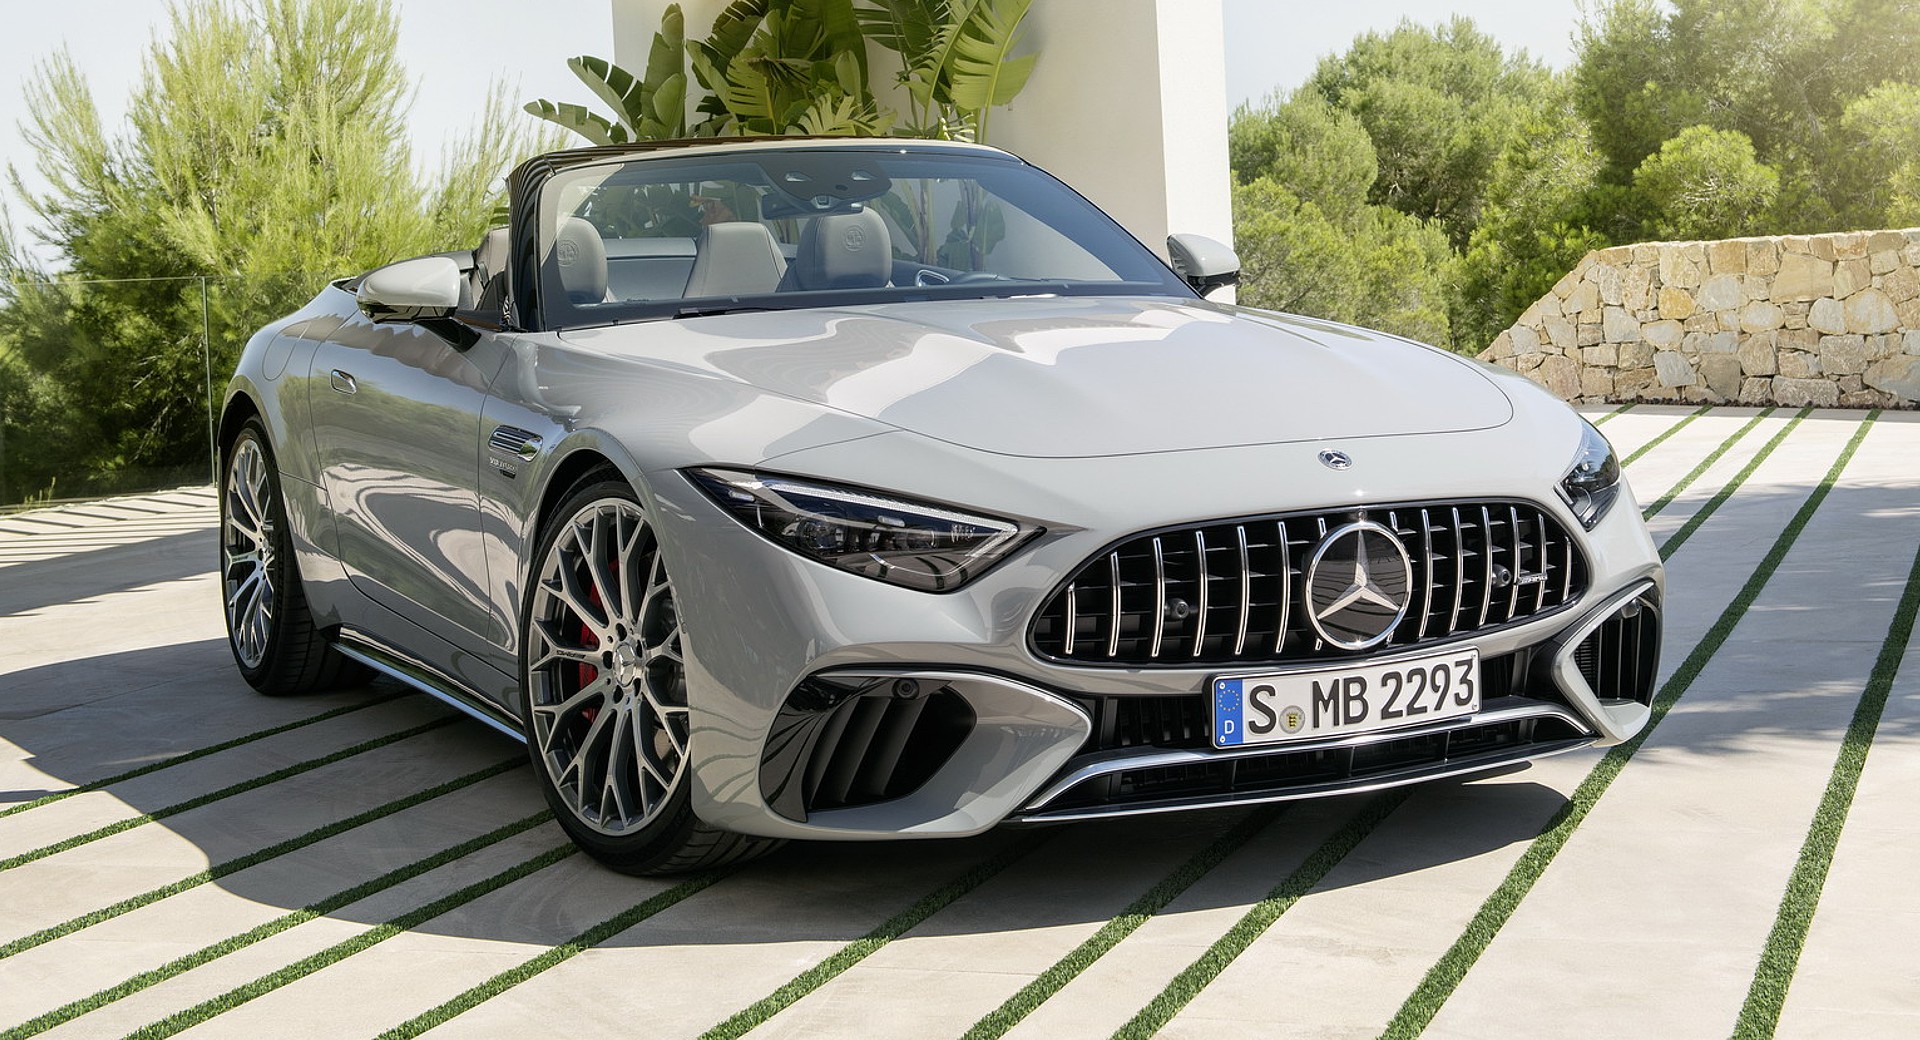 Mercedes-AMG Plots Entry-Level SL 43 With 2.0-liter Four-Cylinder Engine |  Carscoops